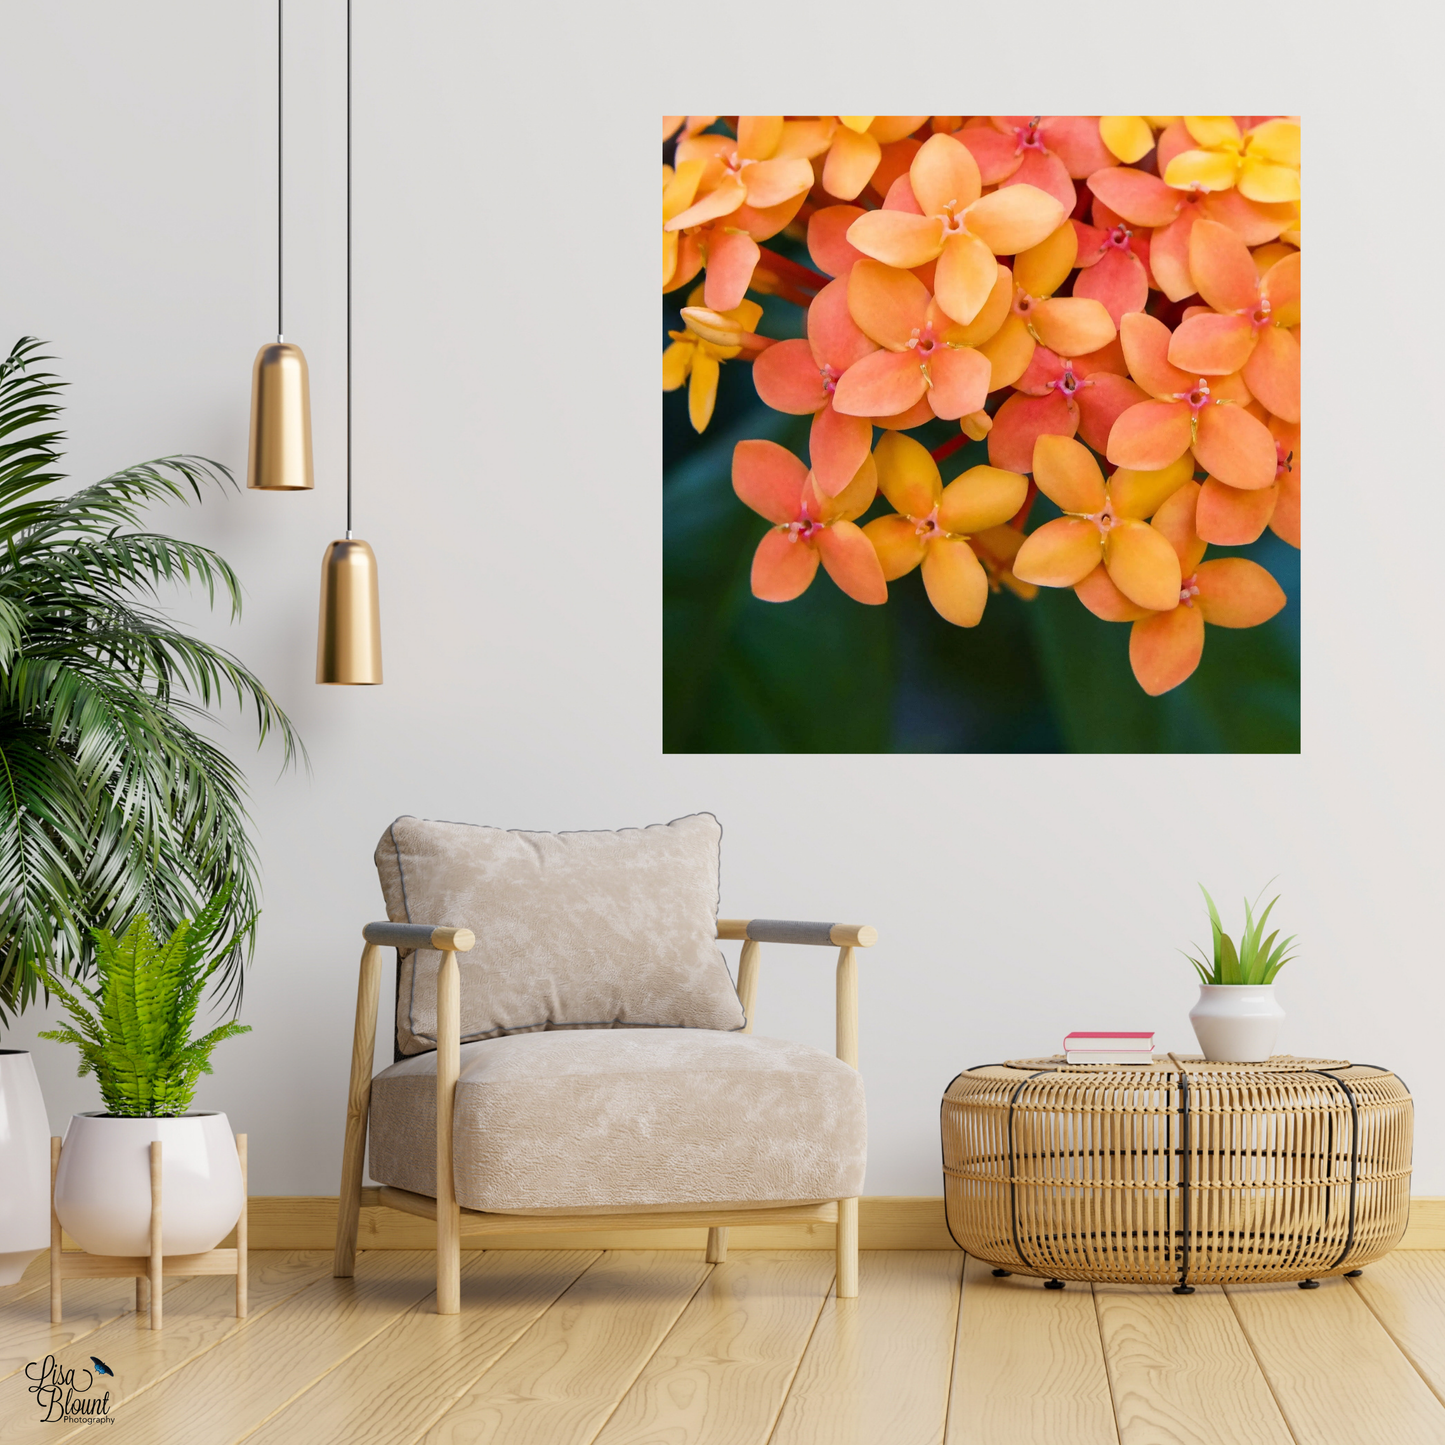 coral geranium flowers wall art in sitting area